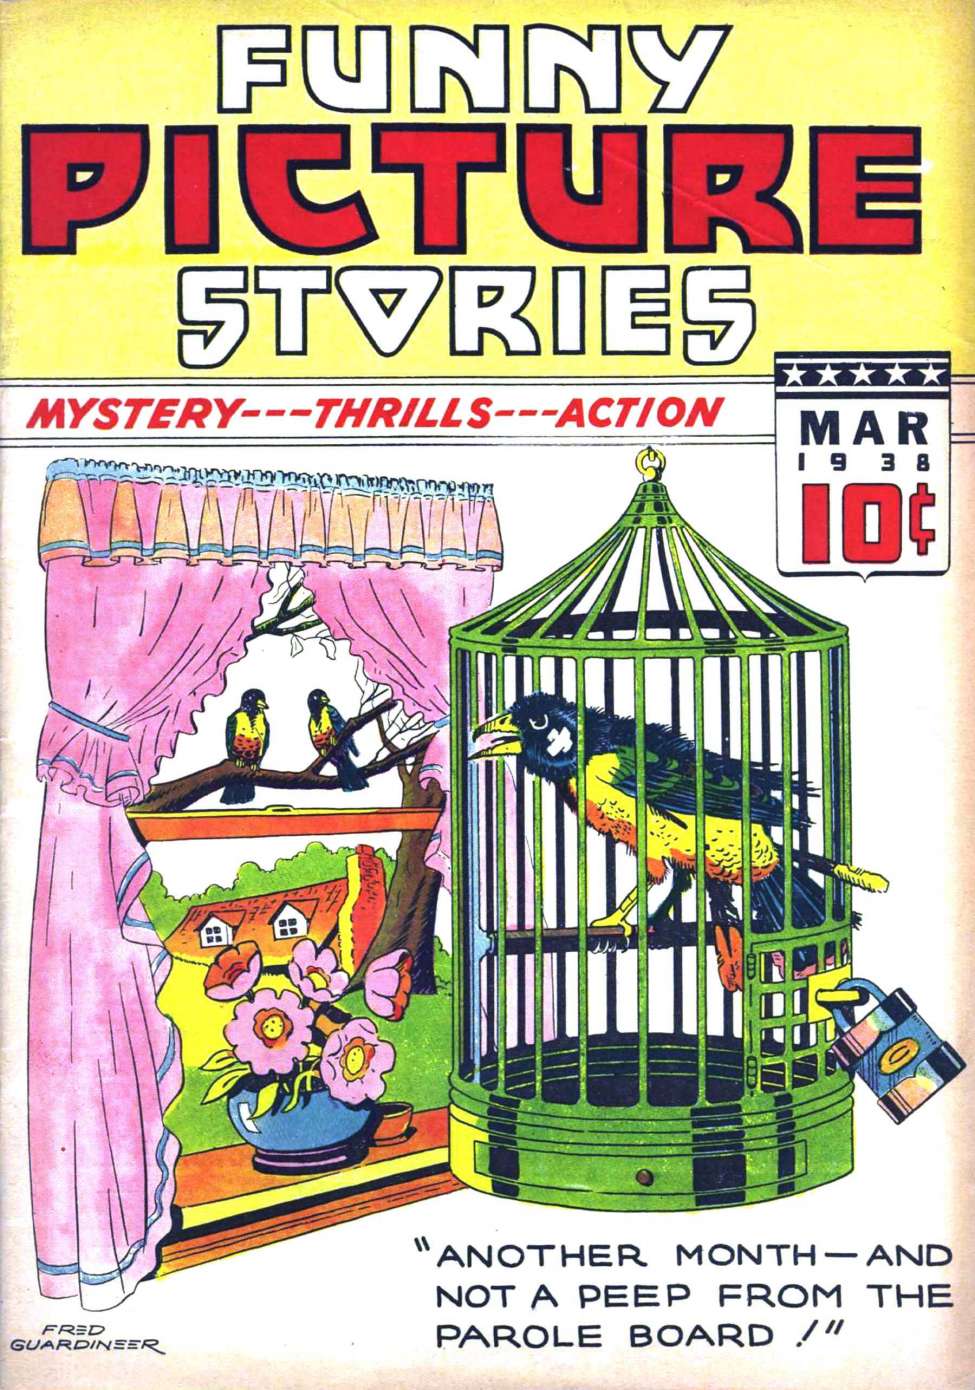 Book Cover For Funny Picture Stories v2 6